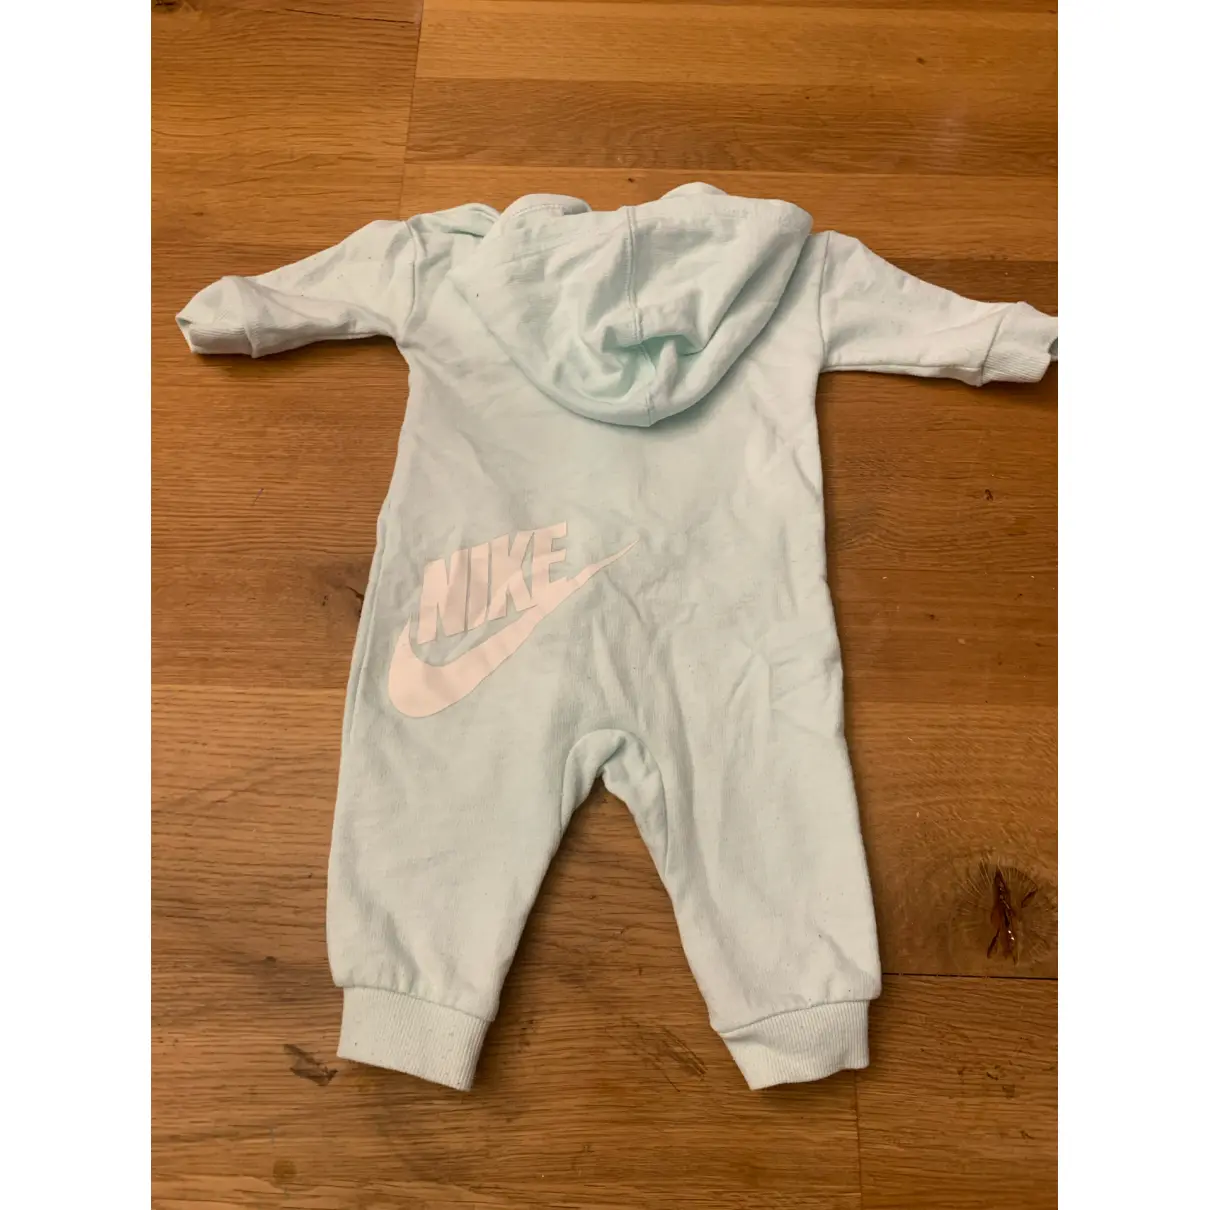 Buy Nike Outfit online